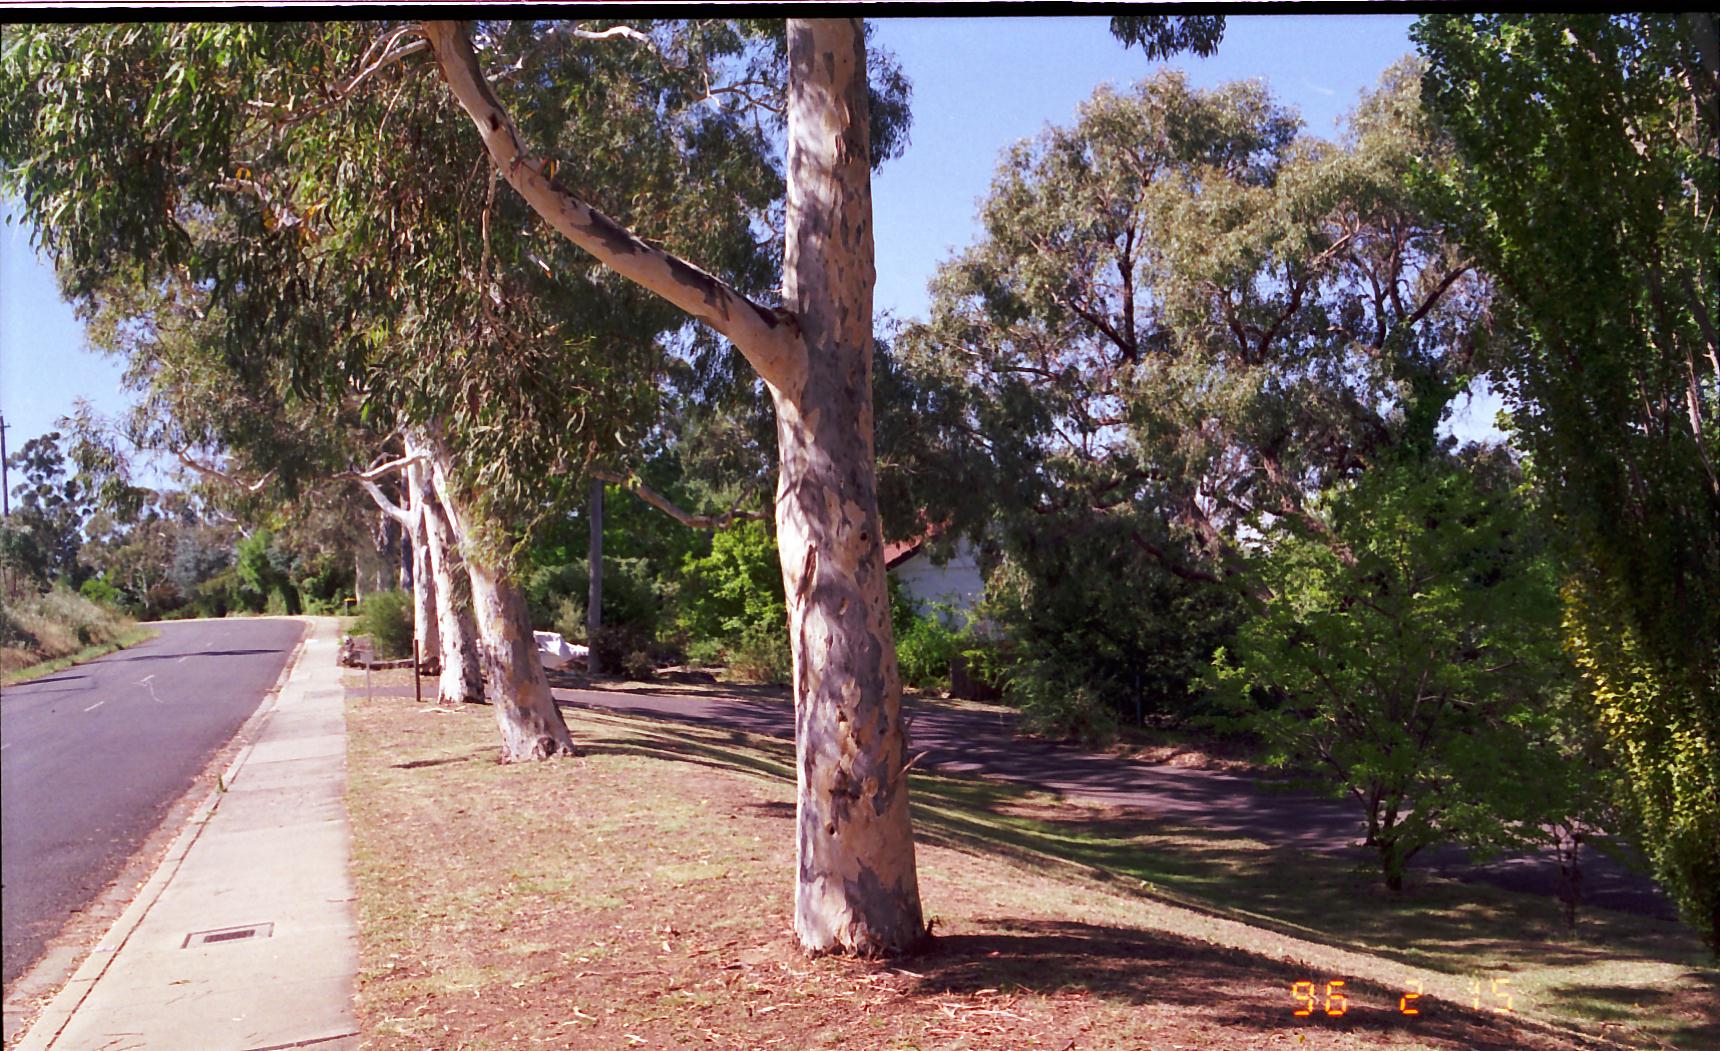 Year 1996 Site 02